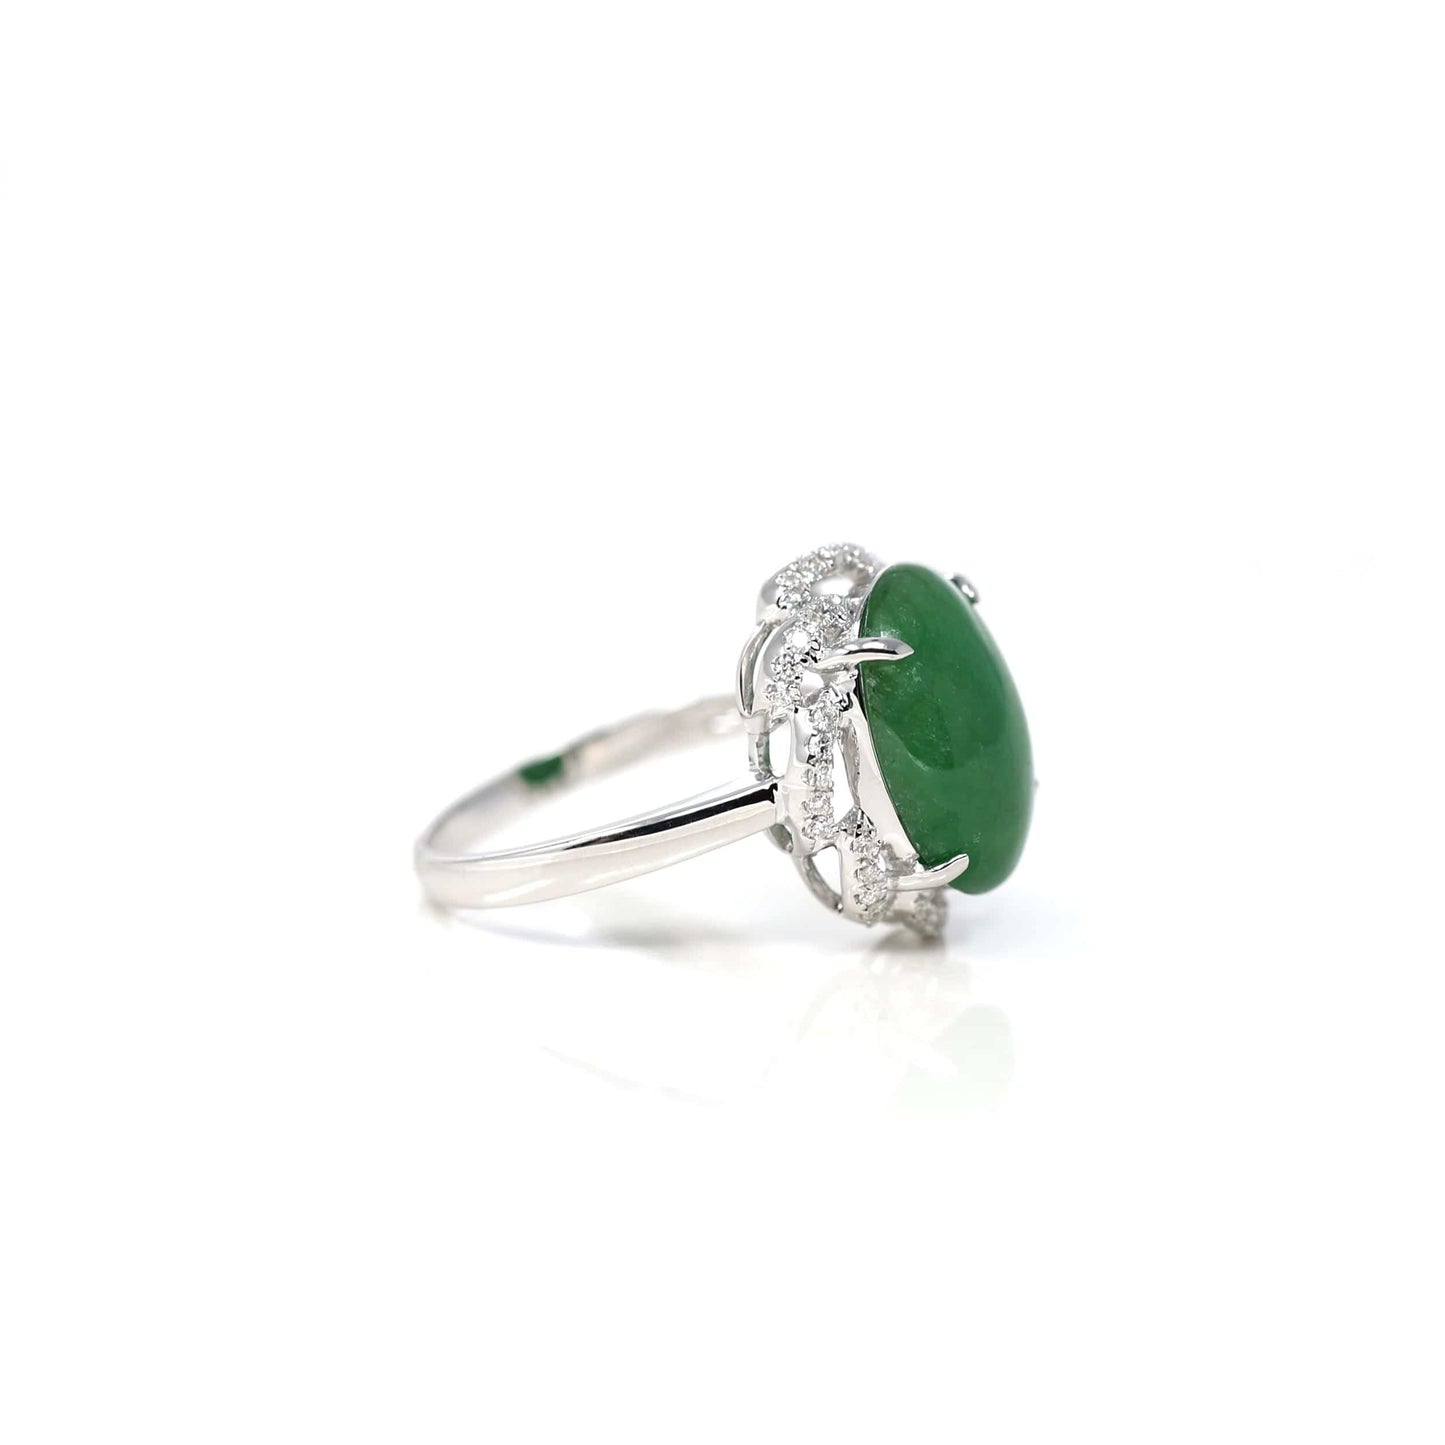 RealJade¨ Co. Jadeite Engagement Ring 18k White Gold Natural Imperial Green Oval Jadeite Jade Engagement Ring With Diamonds